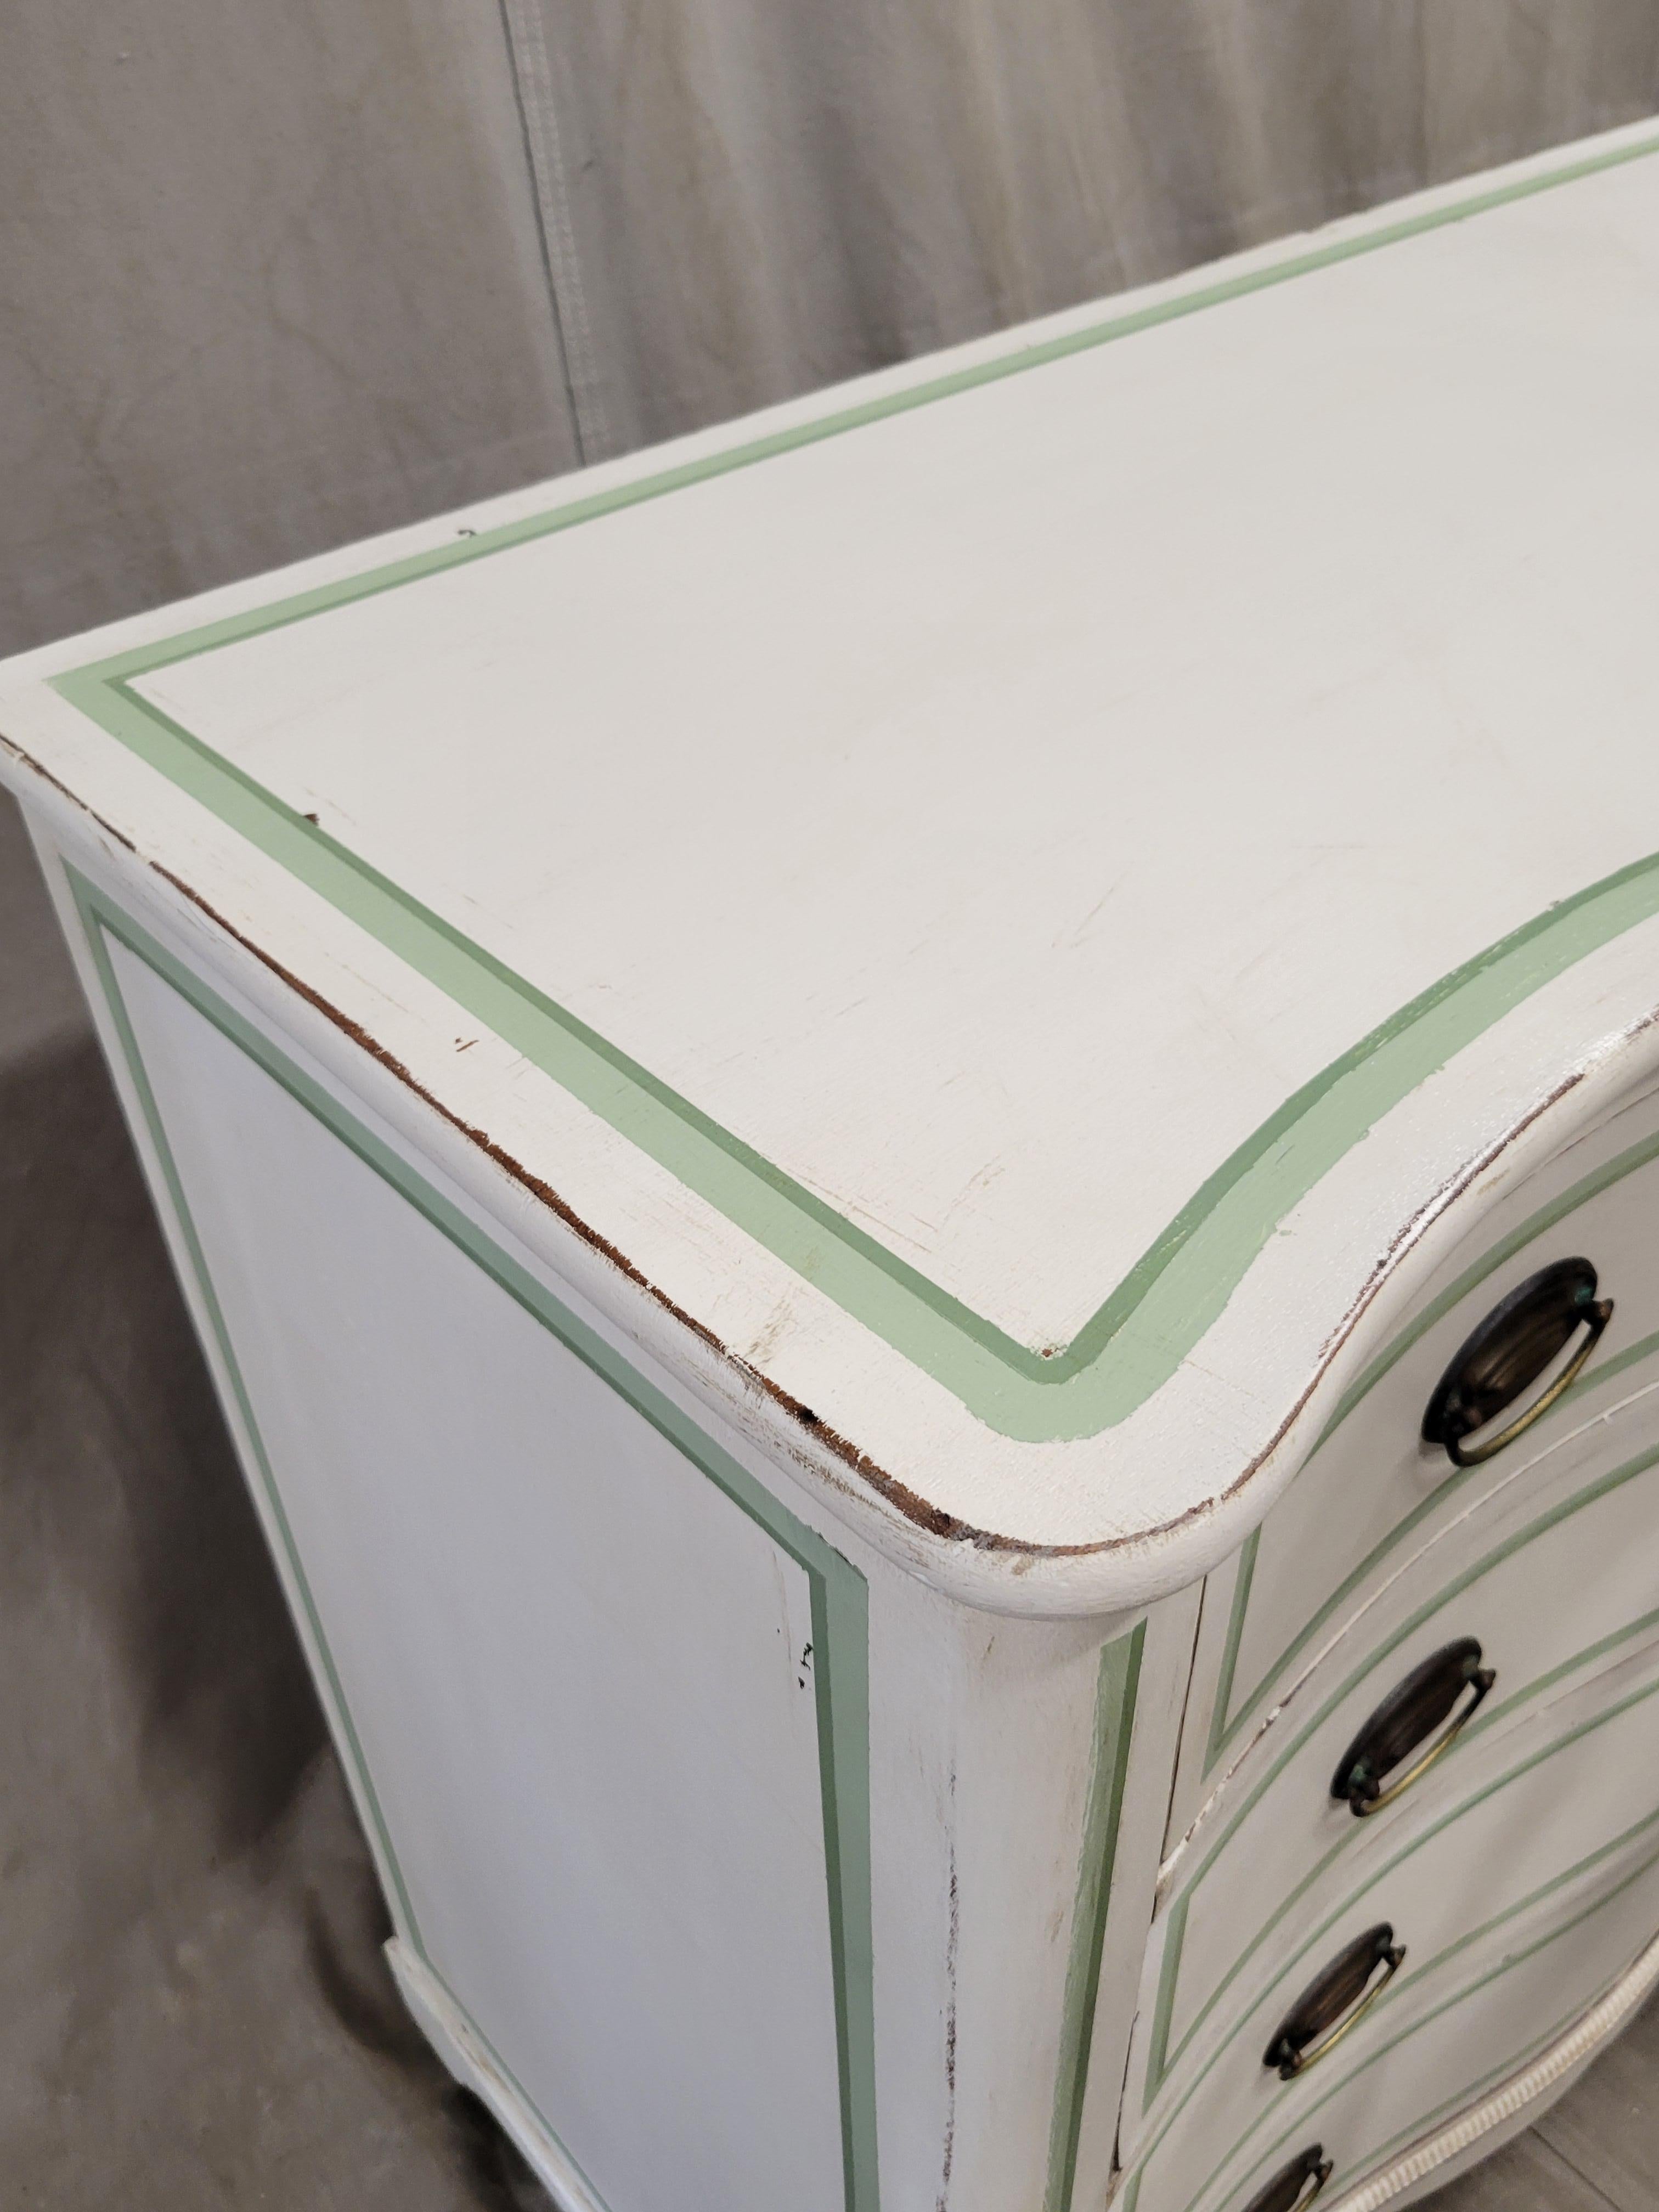 An absolutely charming antique hand painted serpentine front walnut dresser with distressed white paint and green French line motif. The four drawers glide smoothly and offer plenty of storage. Brass tone handles are original to the dresser.